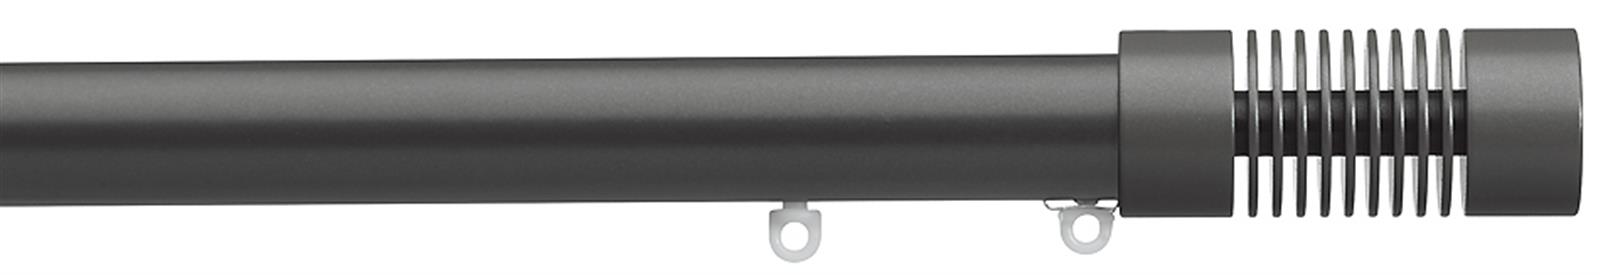 Silent Gliss Metropole 23mm 7600 Charcoal Groove Cylinder Finial